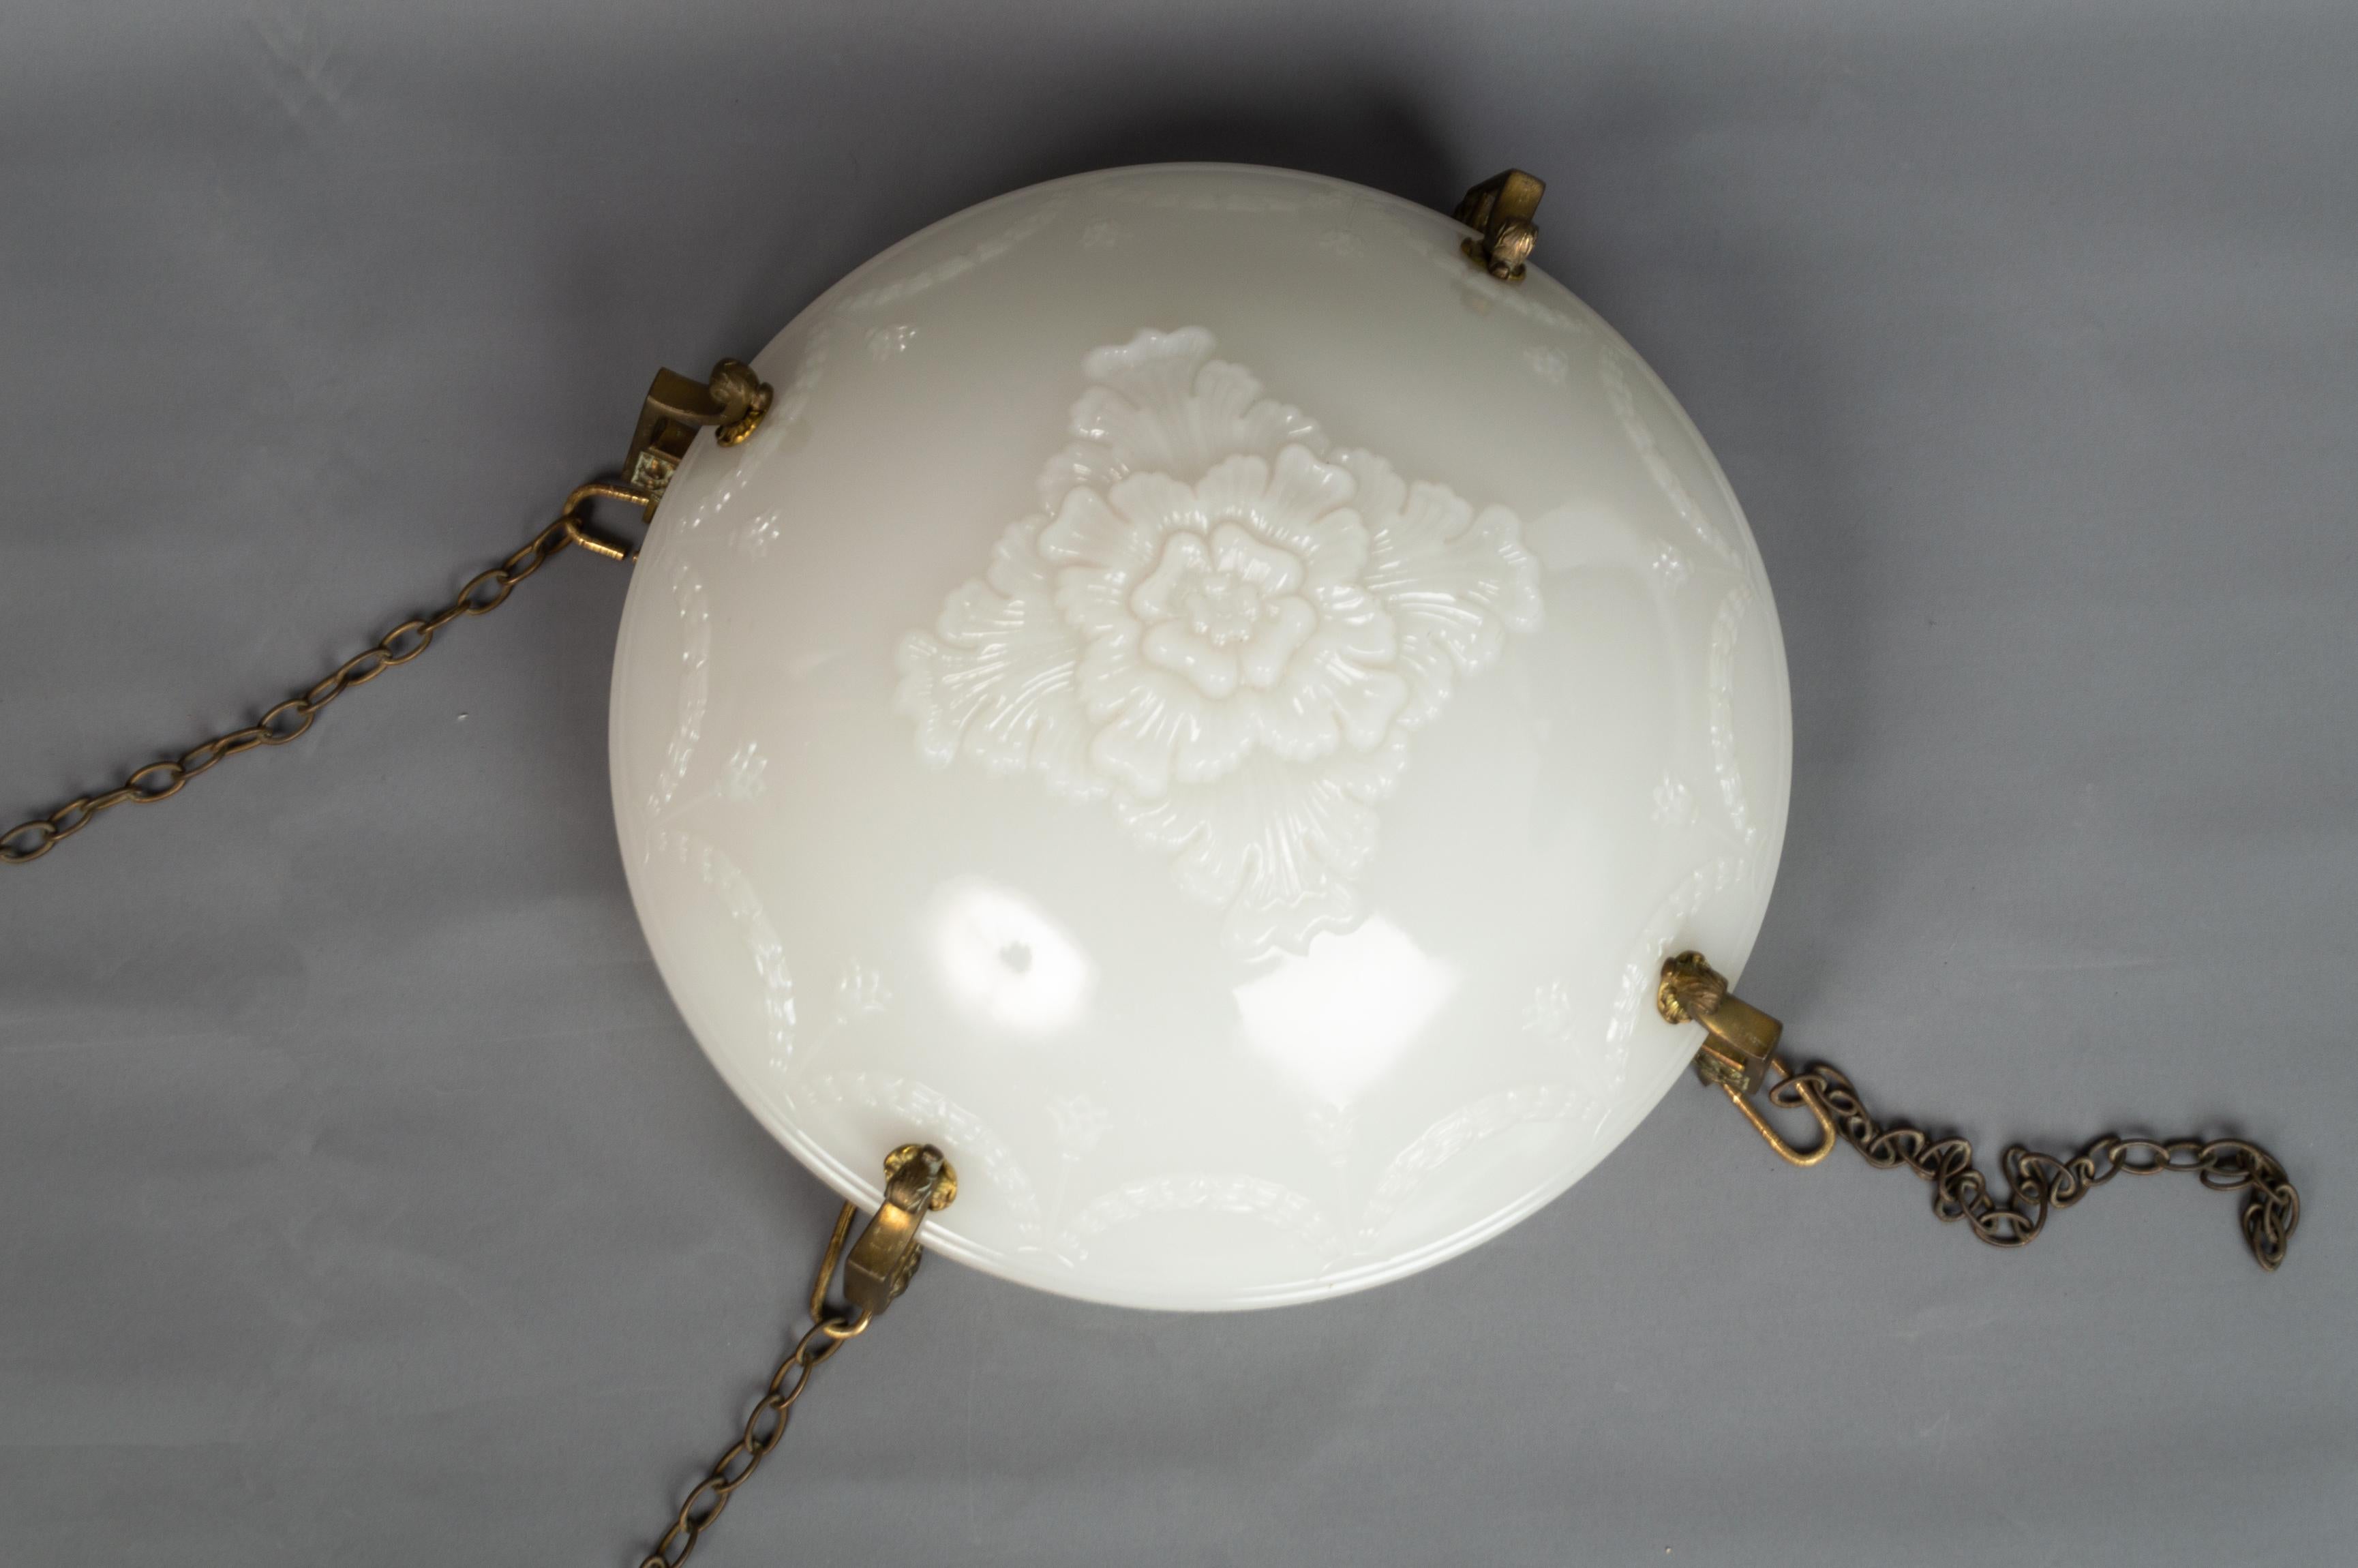 Art Deco English Jefferson moonstone glass plafonnier light pendant, C.1920.

A large Jefferson moonstone glass plafonnier, ?early 20th century, relief moulded with a central floral boss, enclosed by swag borders, with gilt metal mounts and